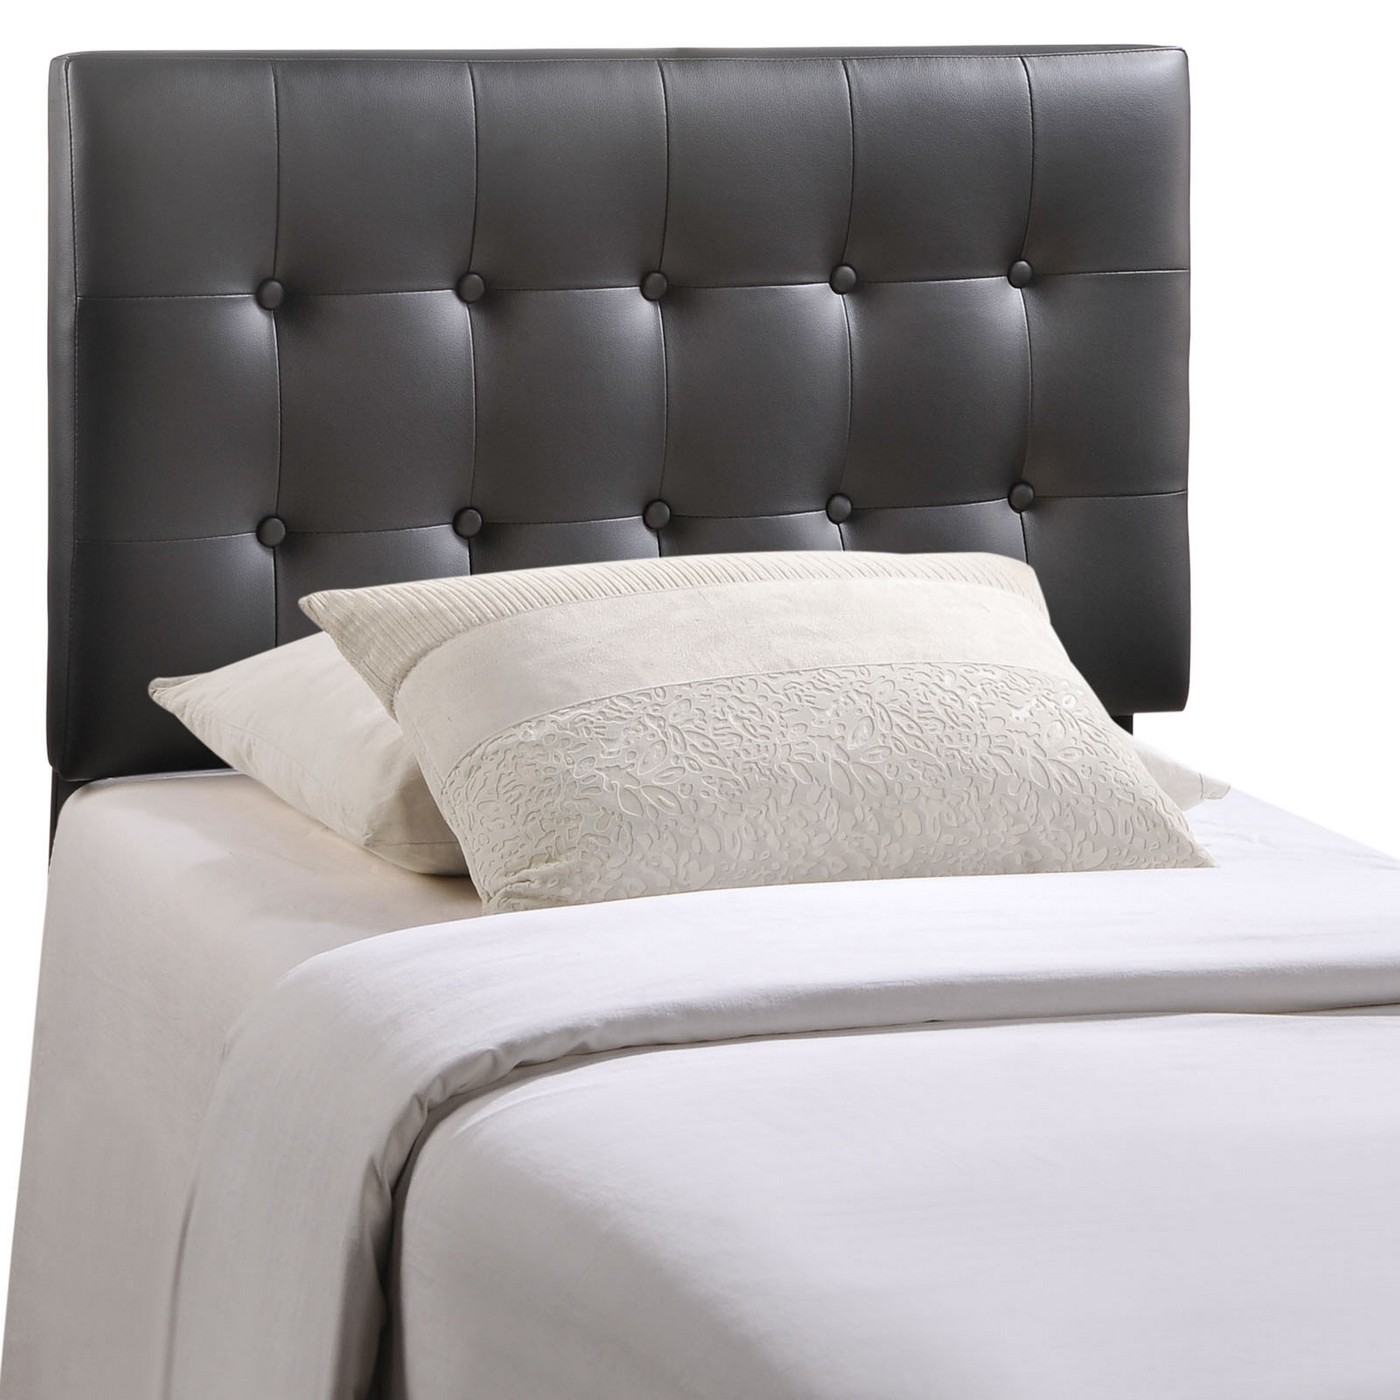 Emily modern button tufted twin faux leather headboard black 1